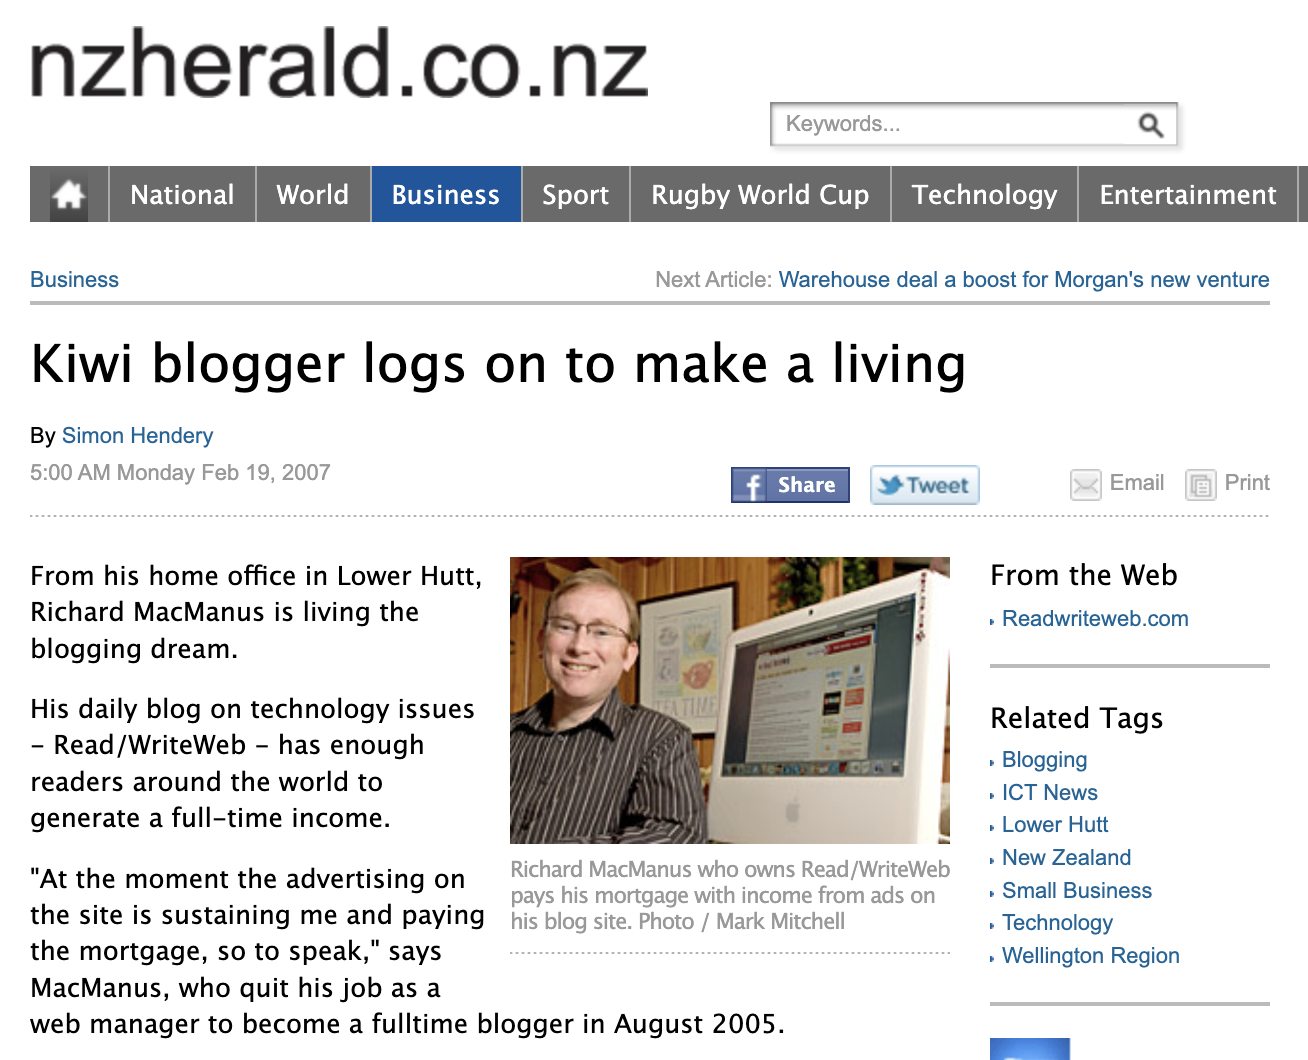 NZ Herald article about a kiwi blogger